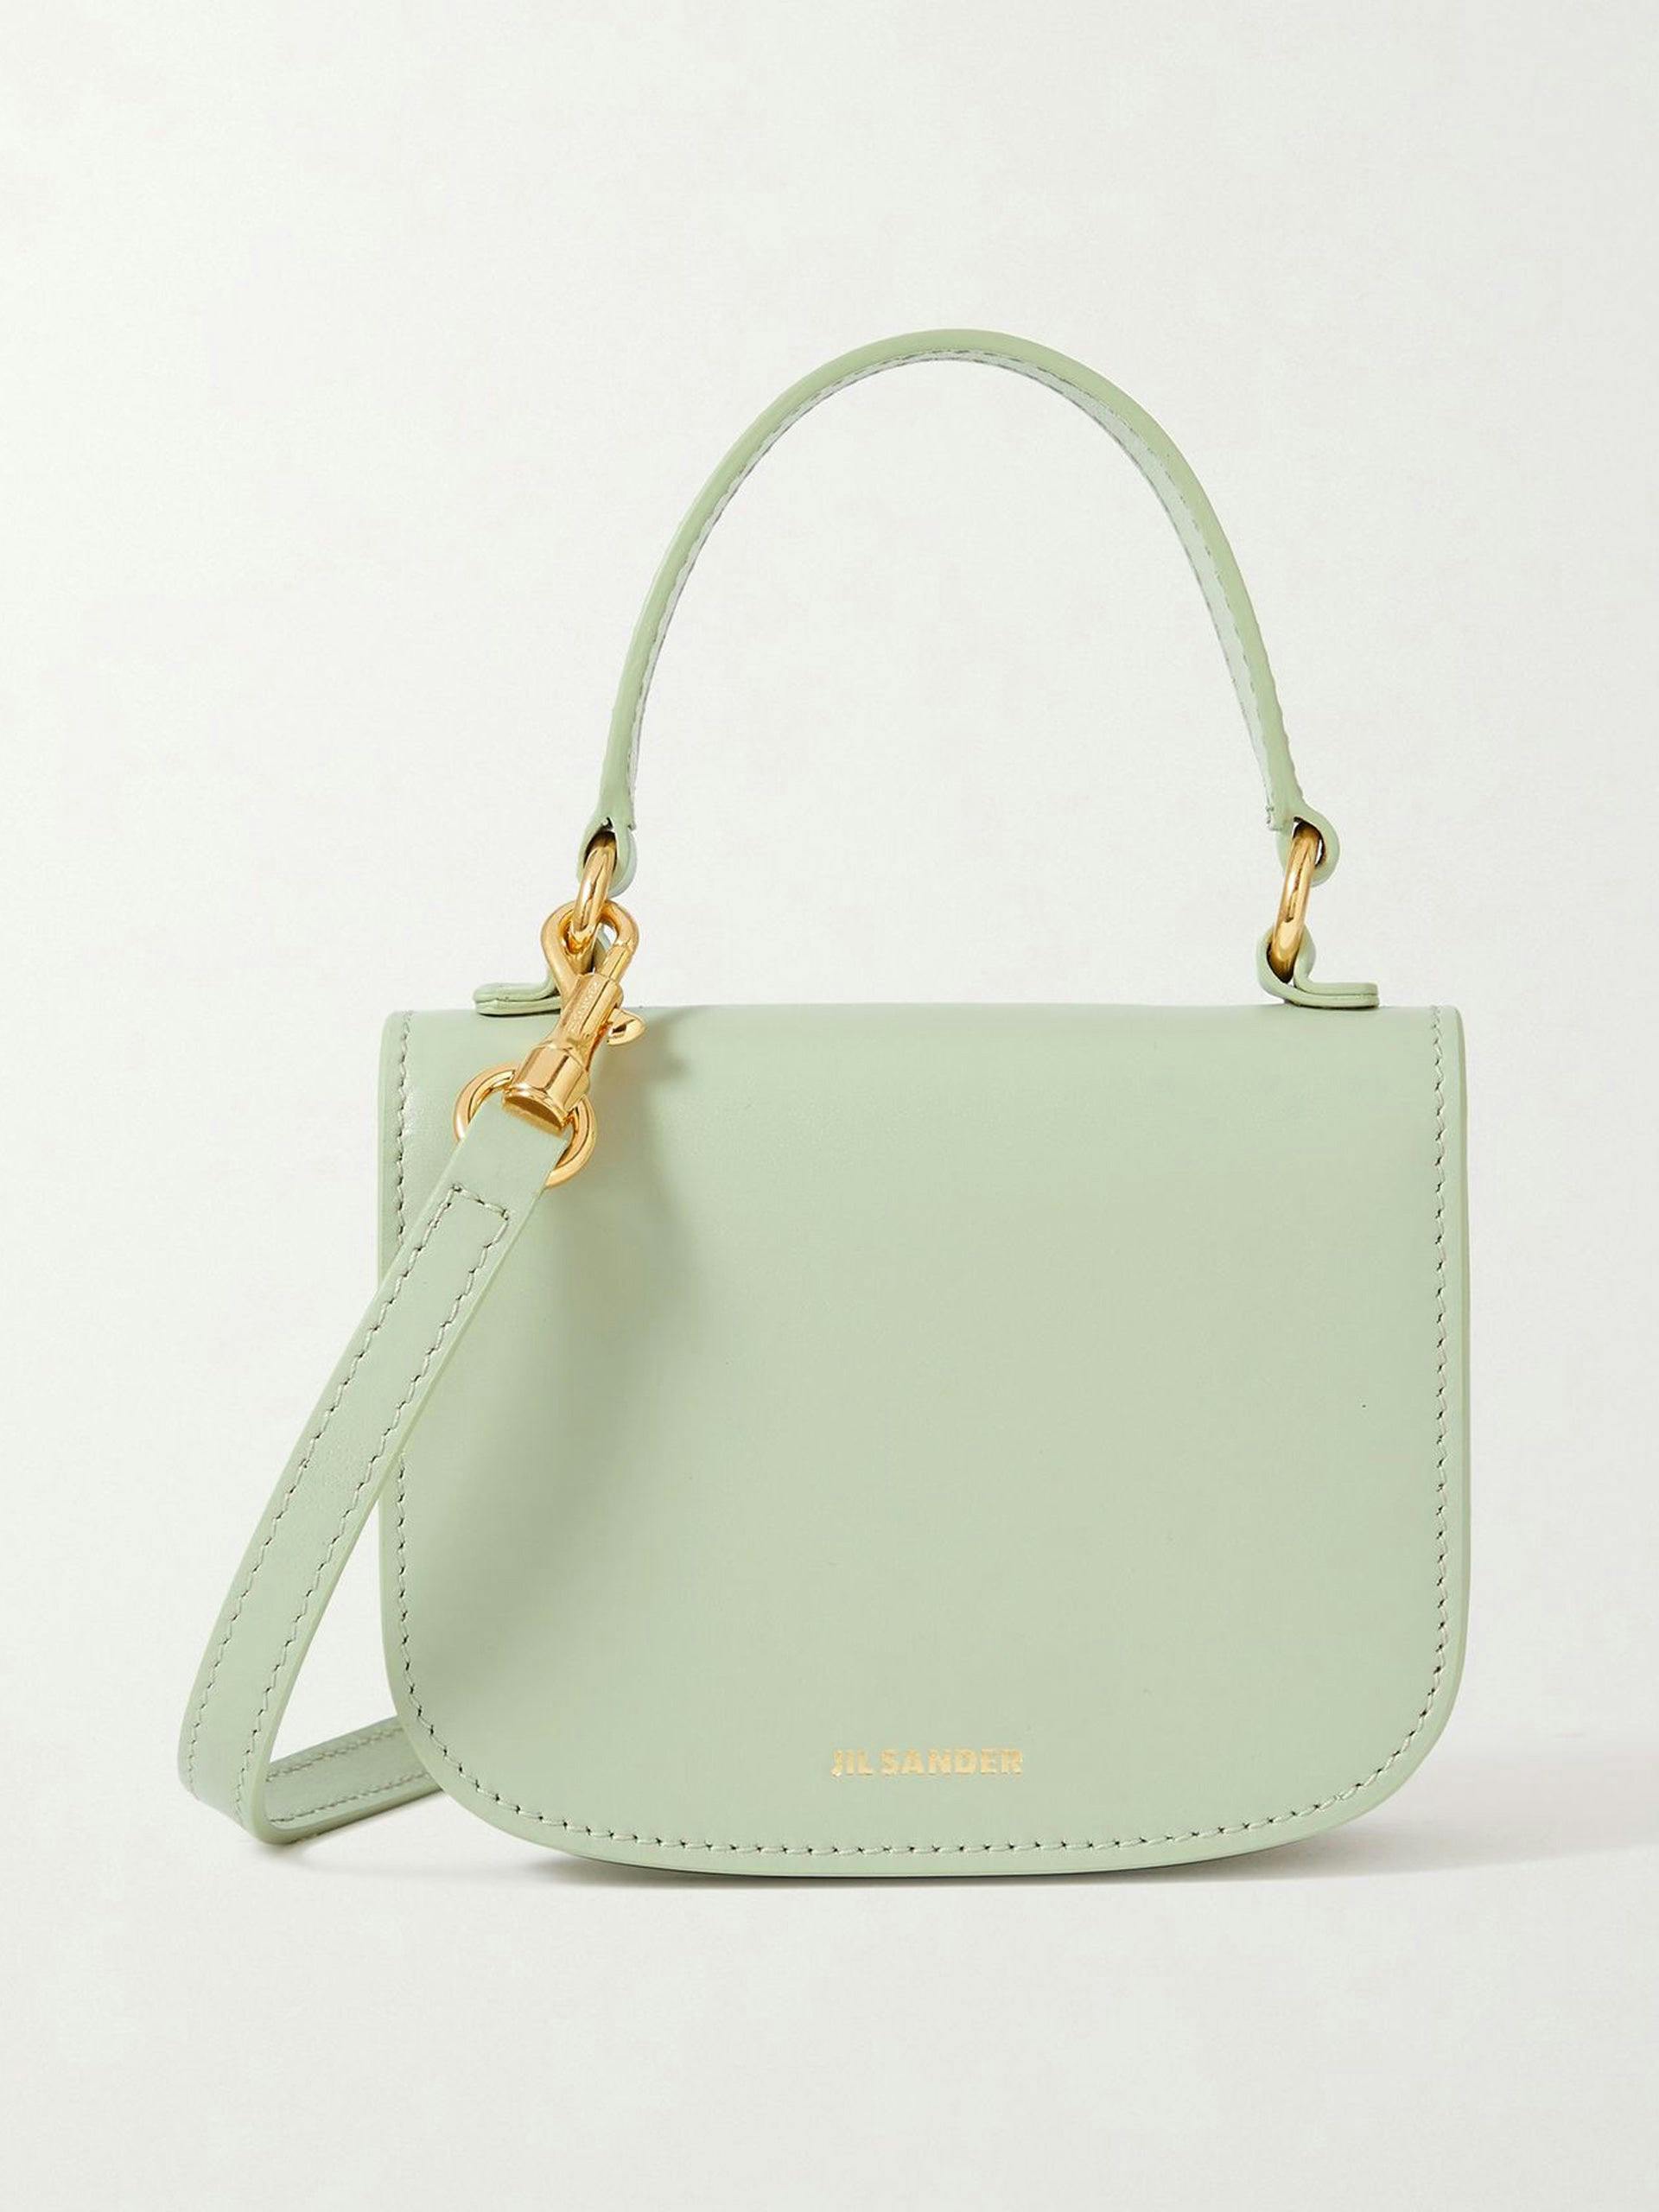 Green leather bag